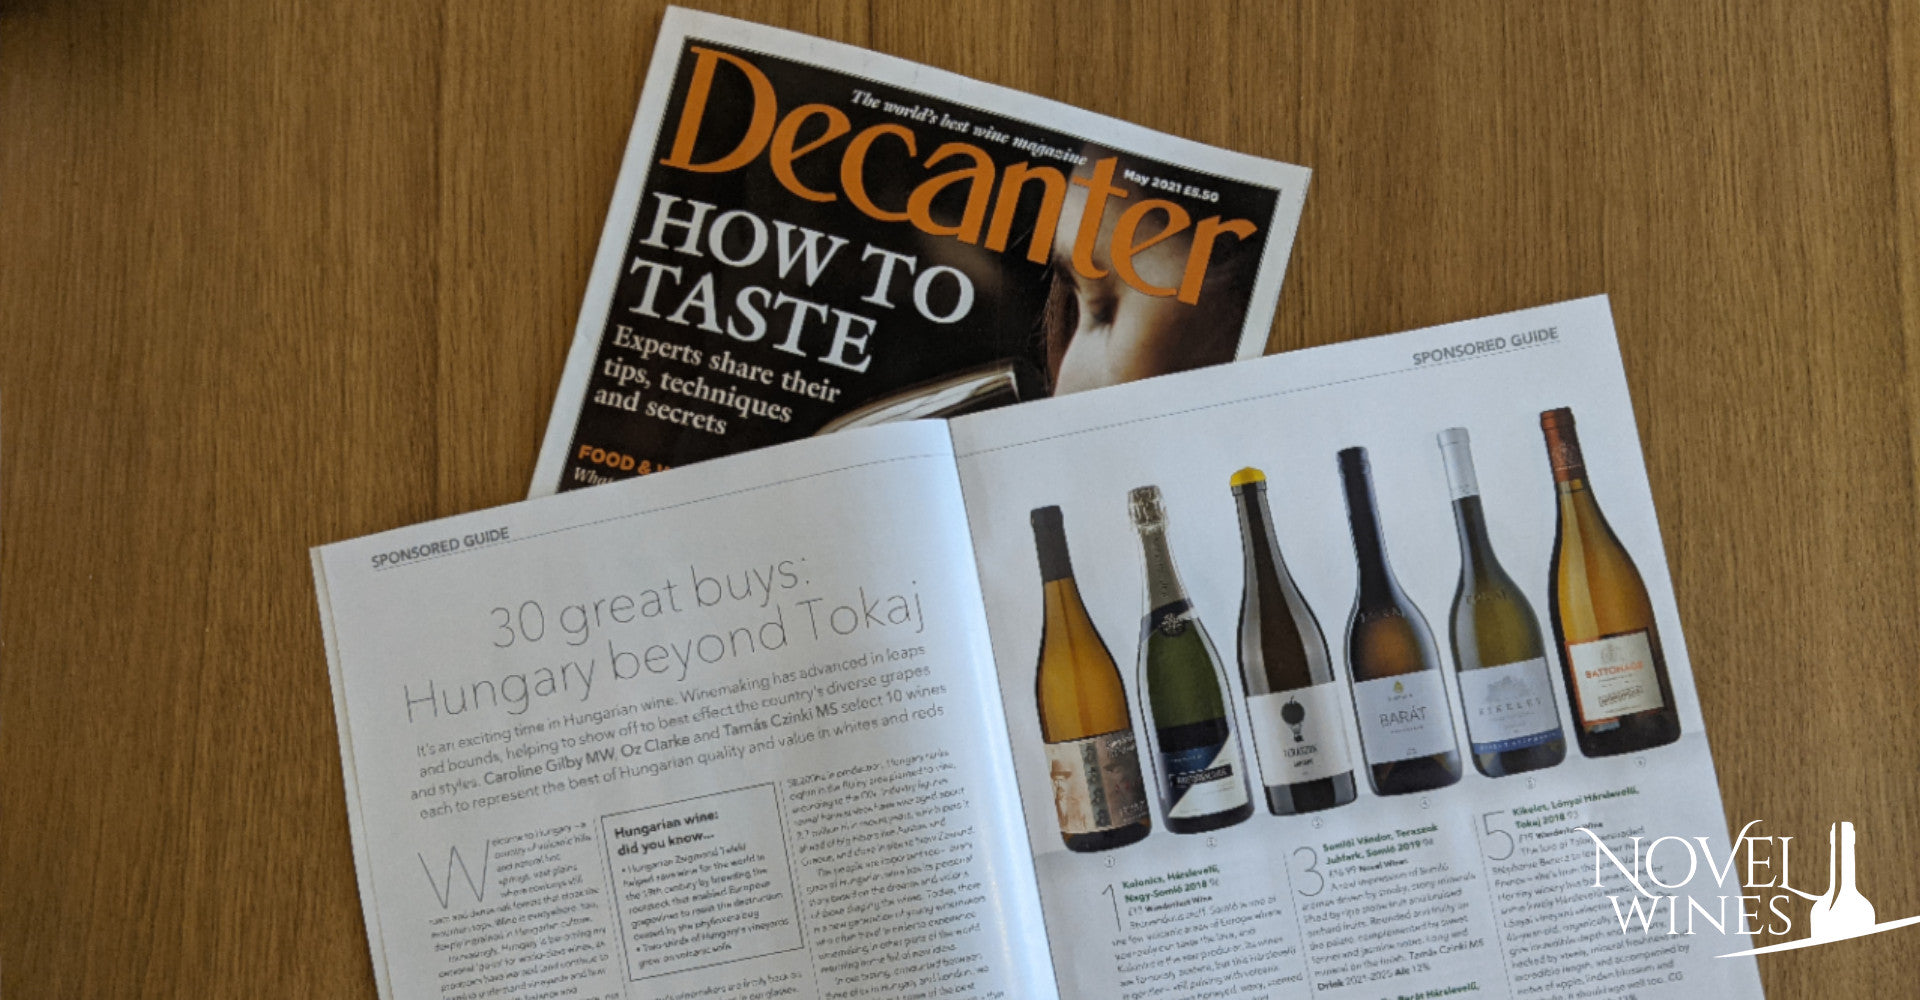 Big Decanter Wins for Hungarian Wines in their Latest Issue